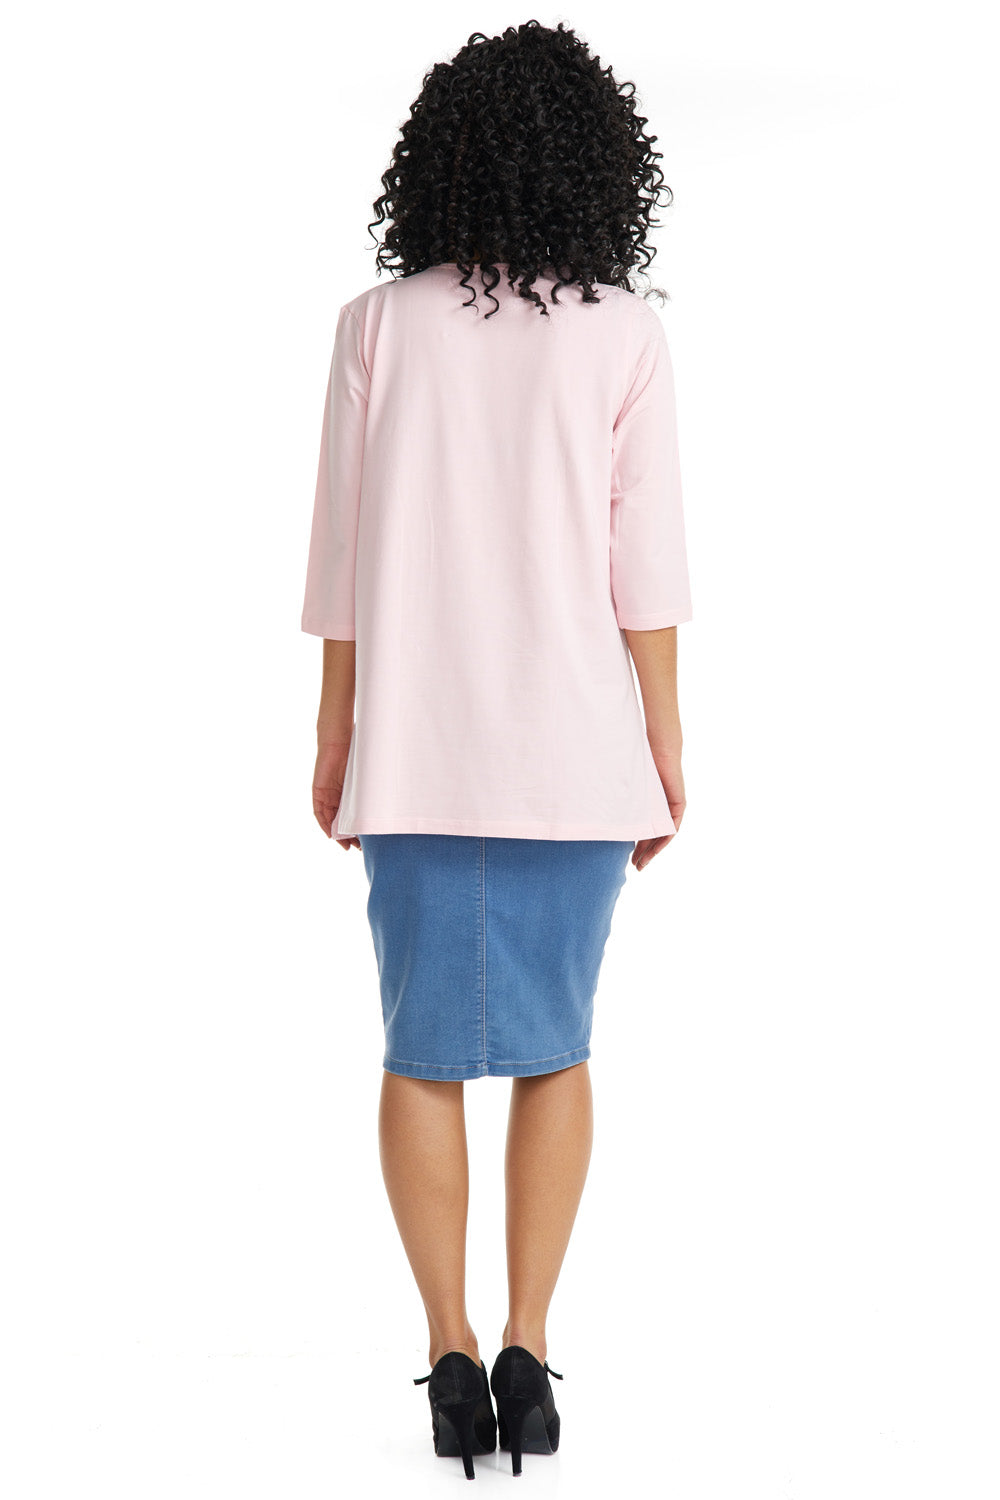 vibrant pink Basic 3/4 sleeve cotton oversized top for women